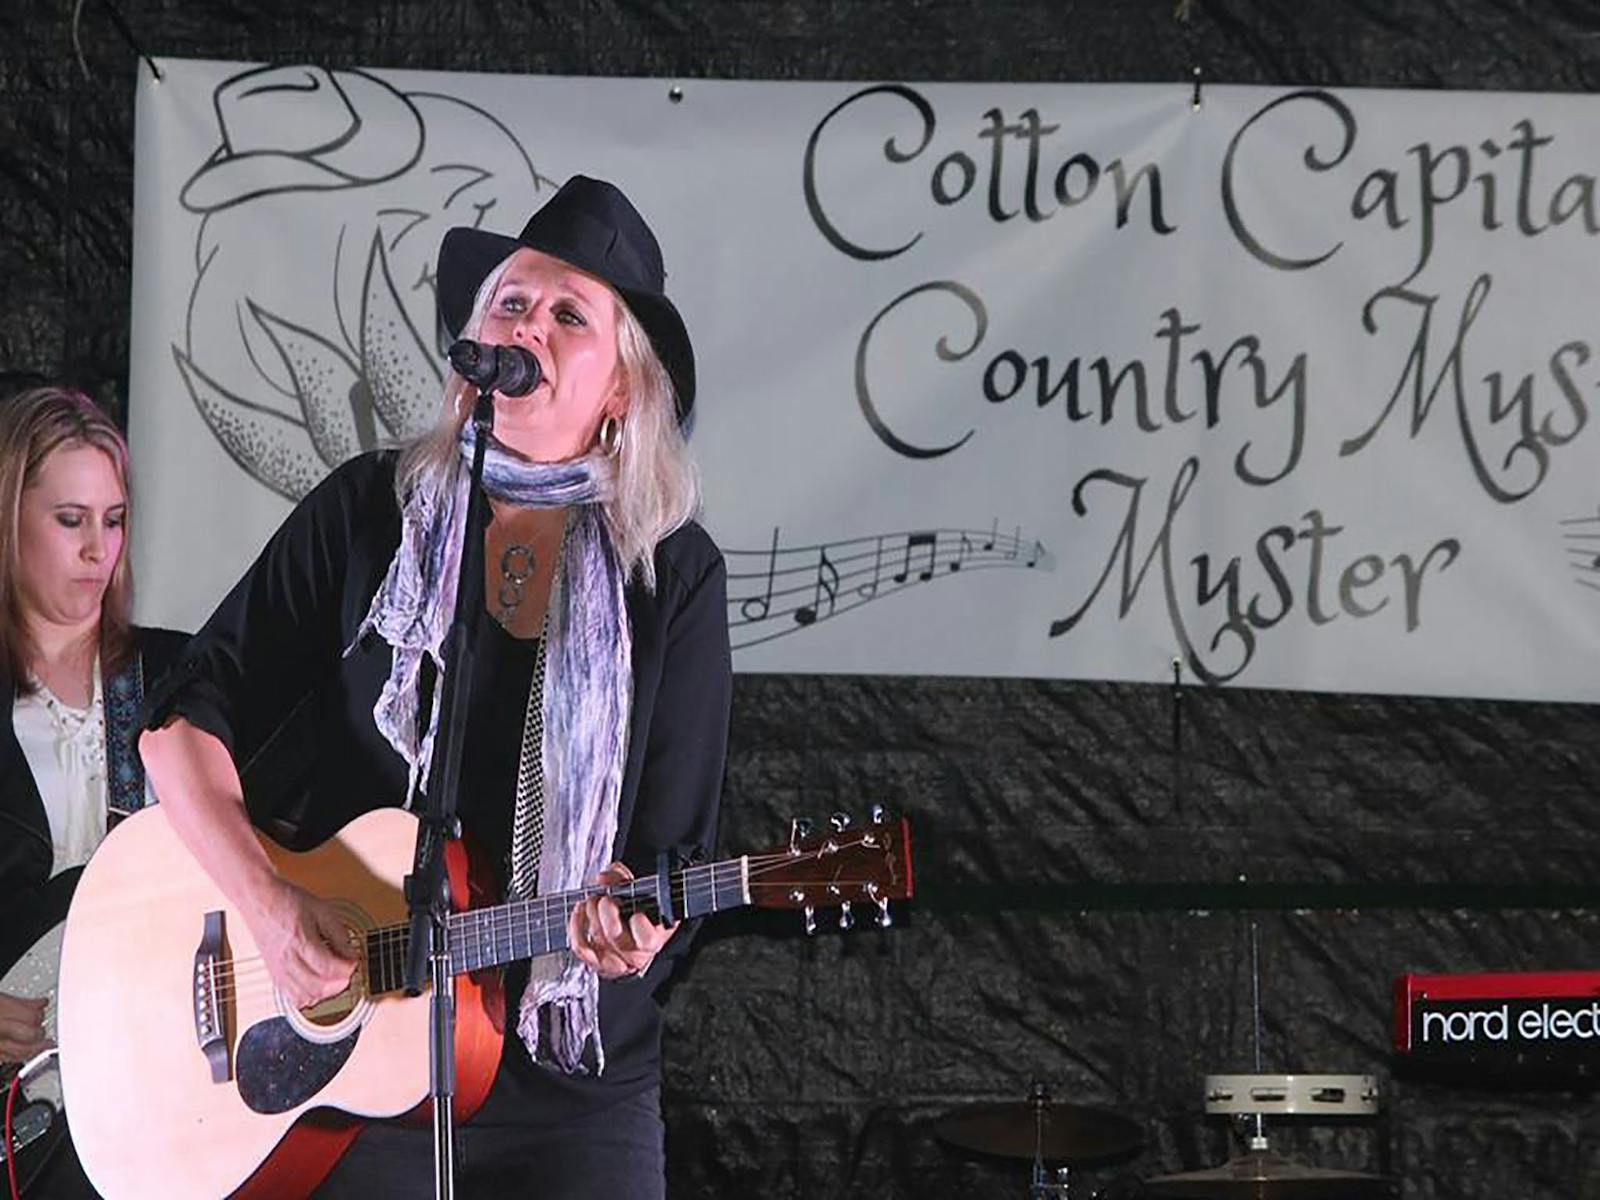 Image for Wee Waa Cotton Capital Country Music Muster